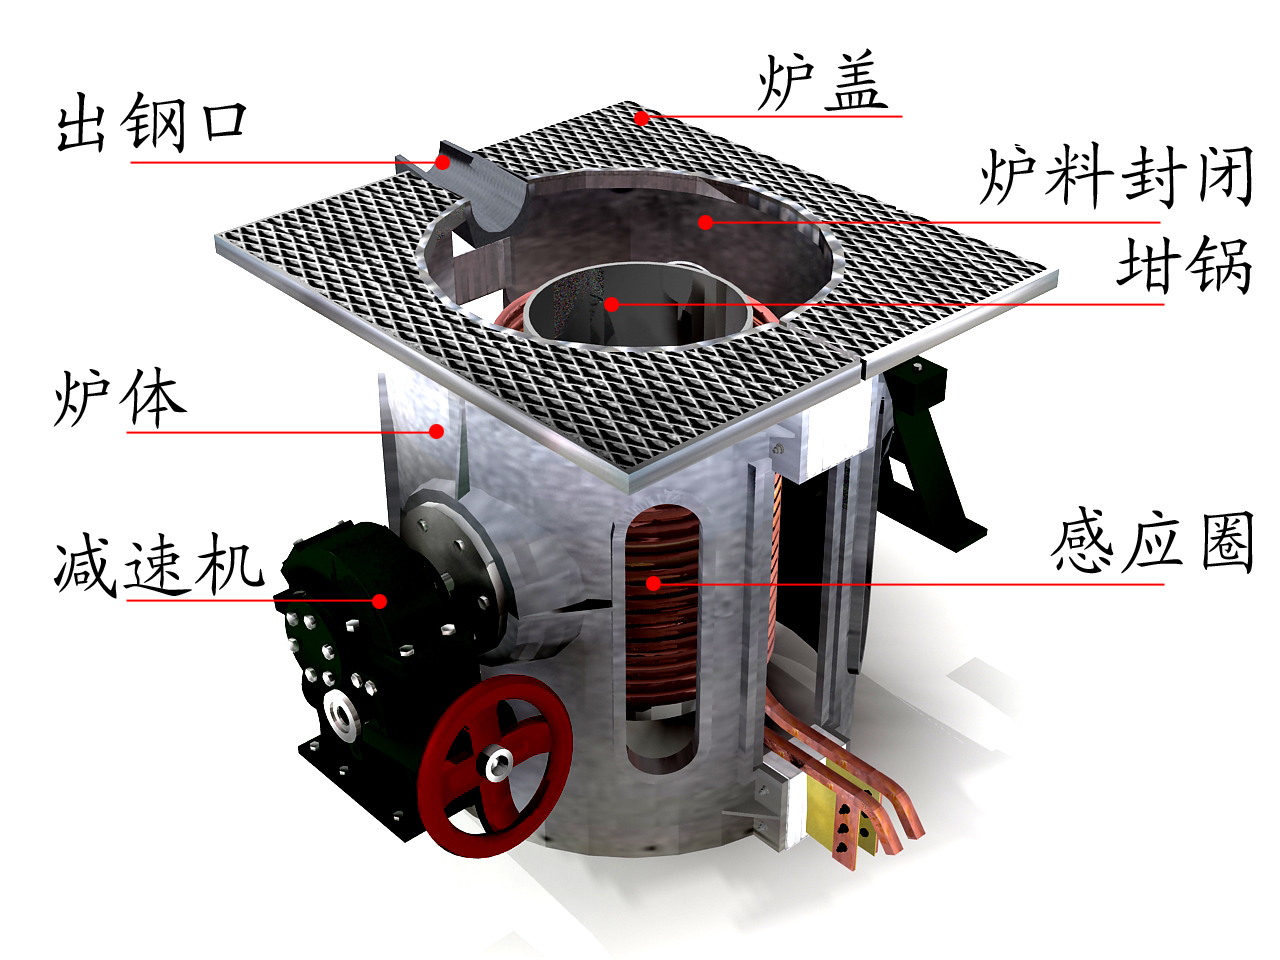 Internal structure of induction melting furnace